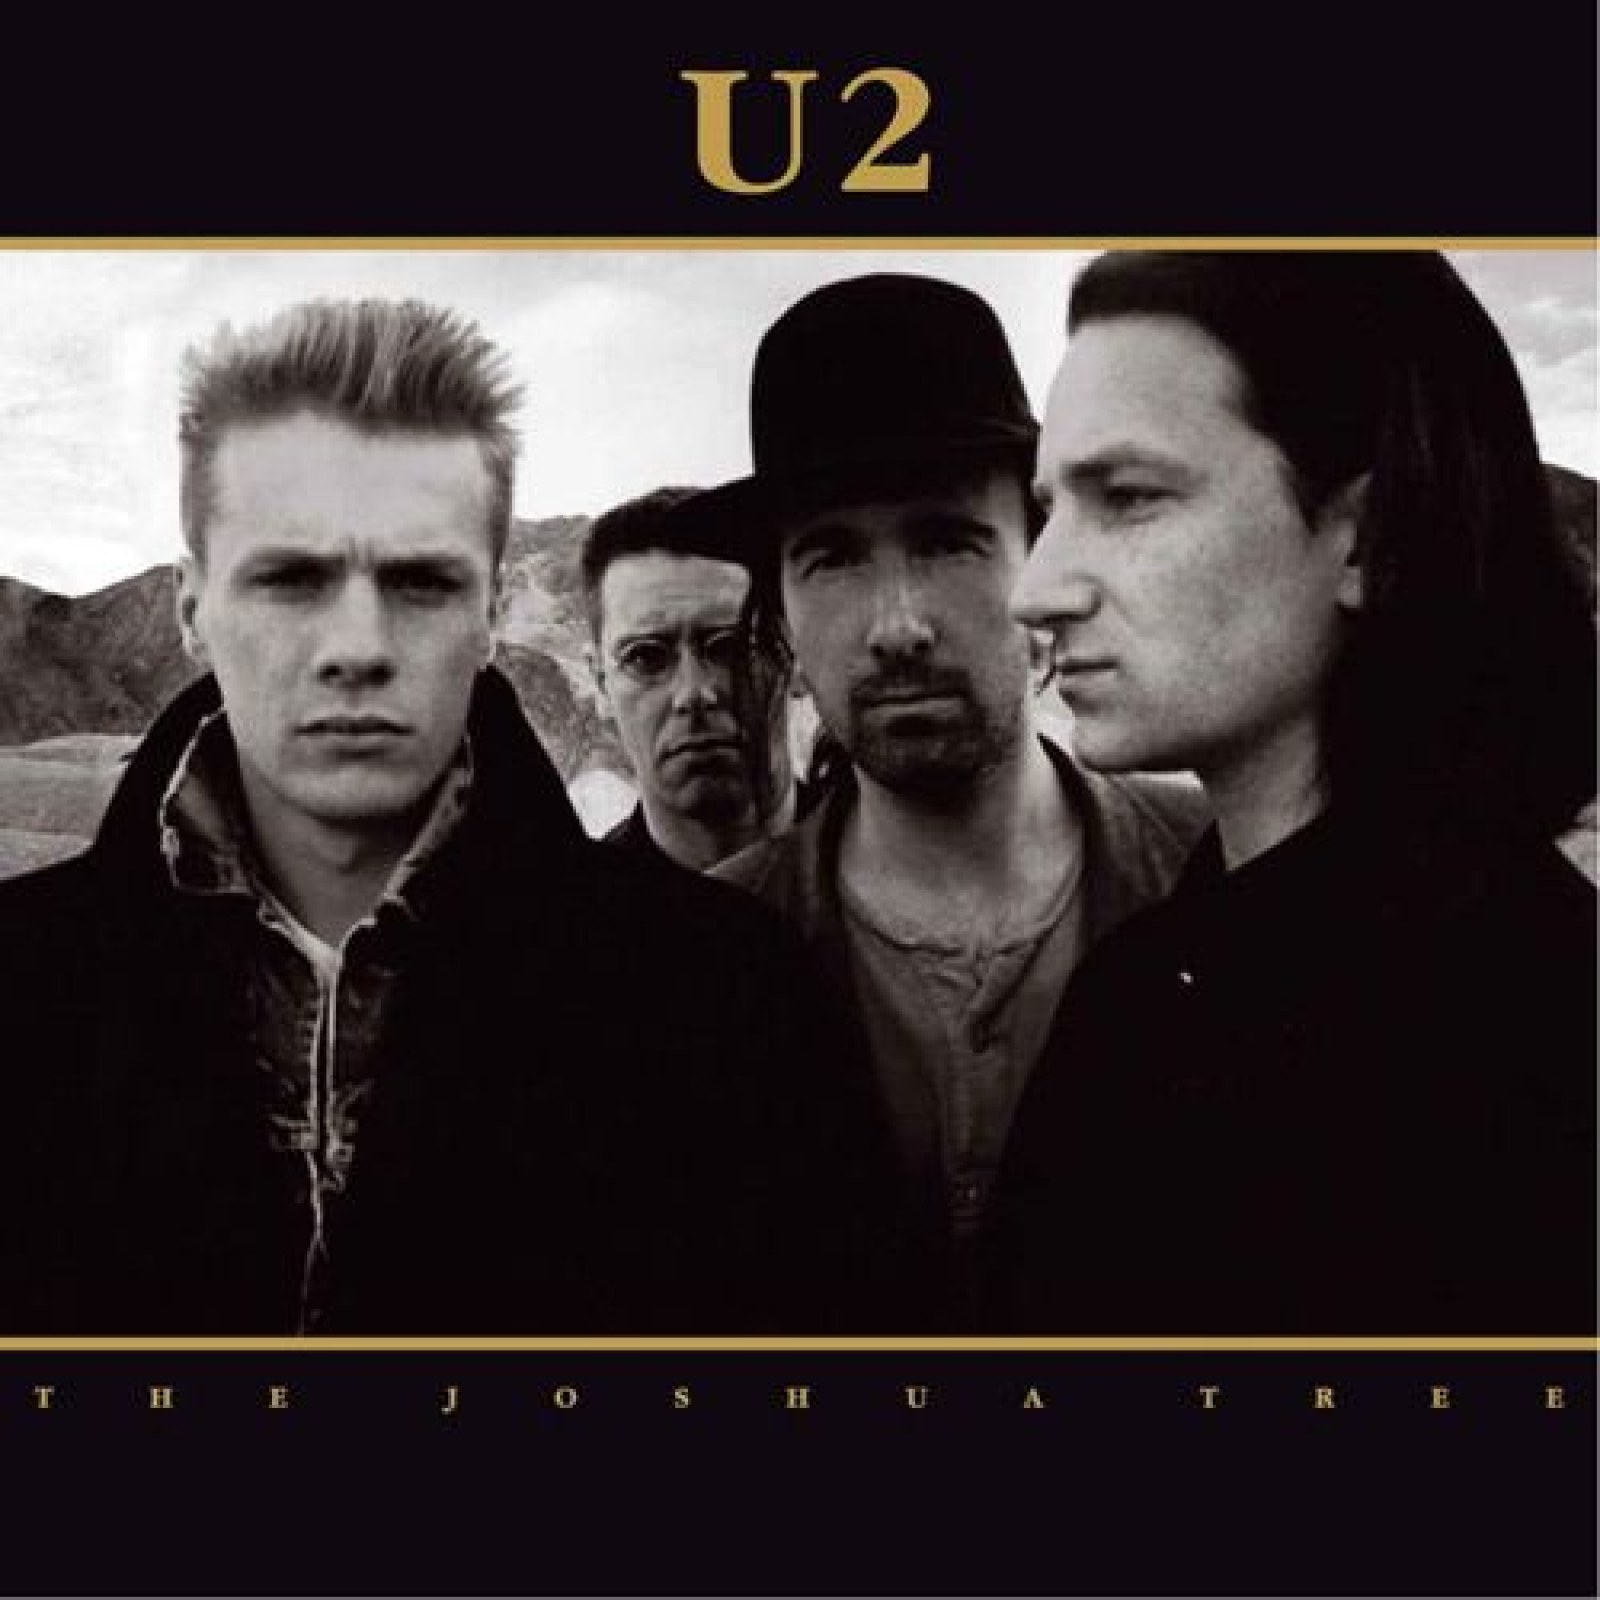 U2 - With Or Without You (Official Music Video) 